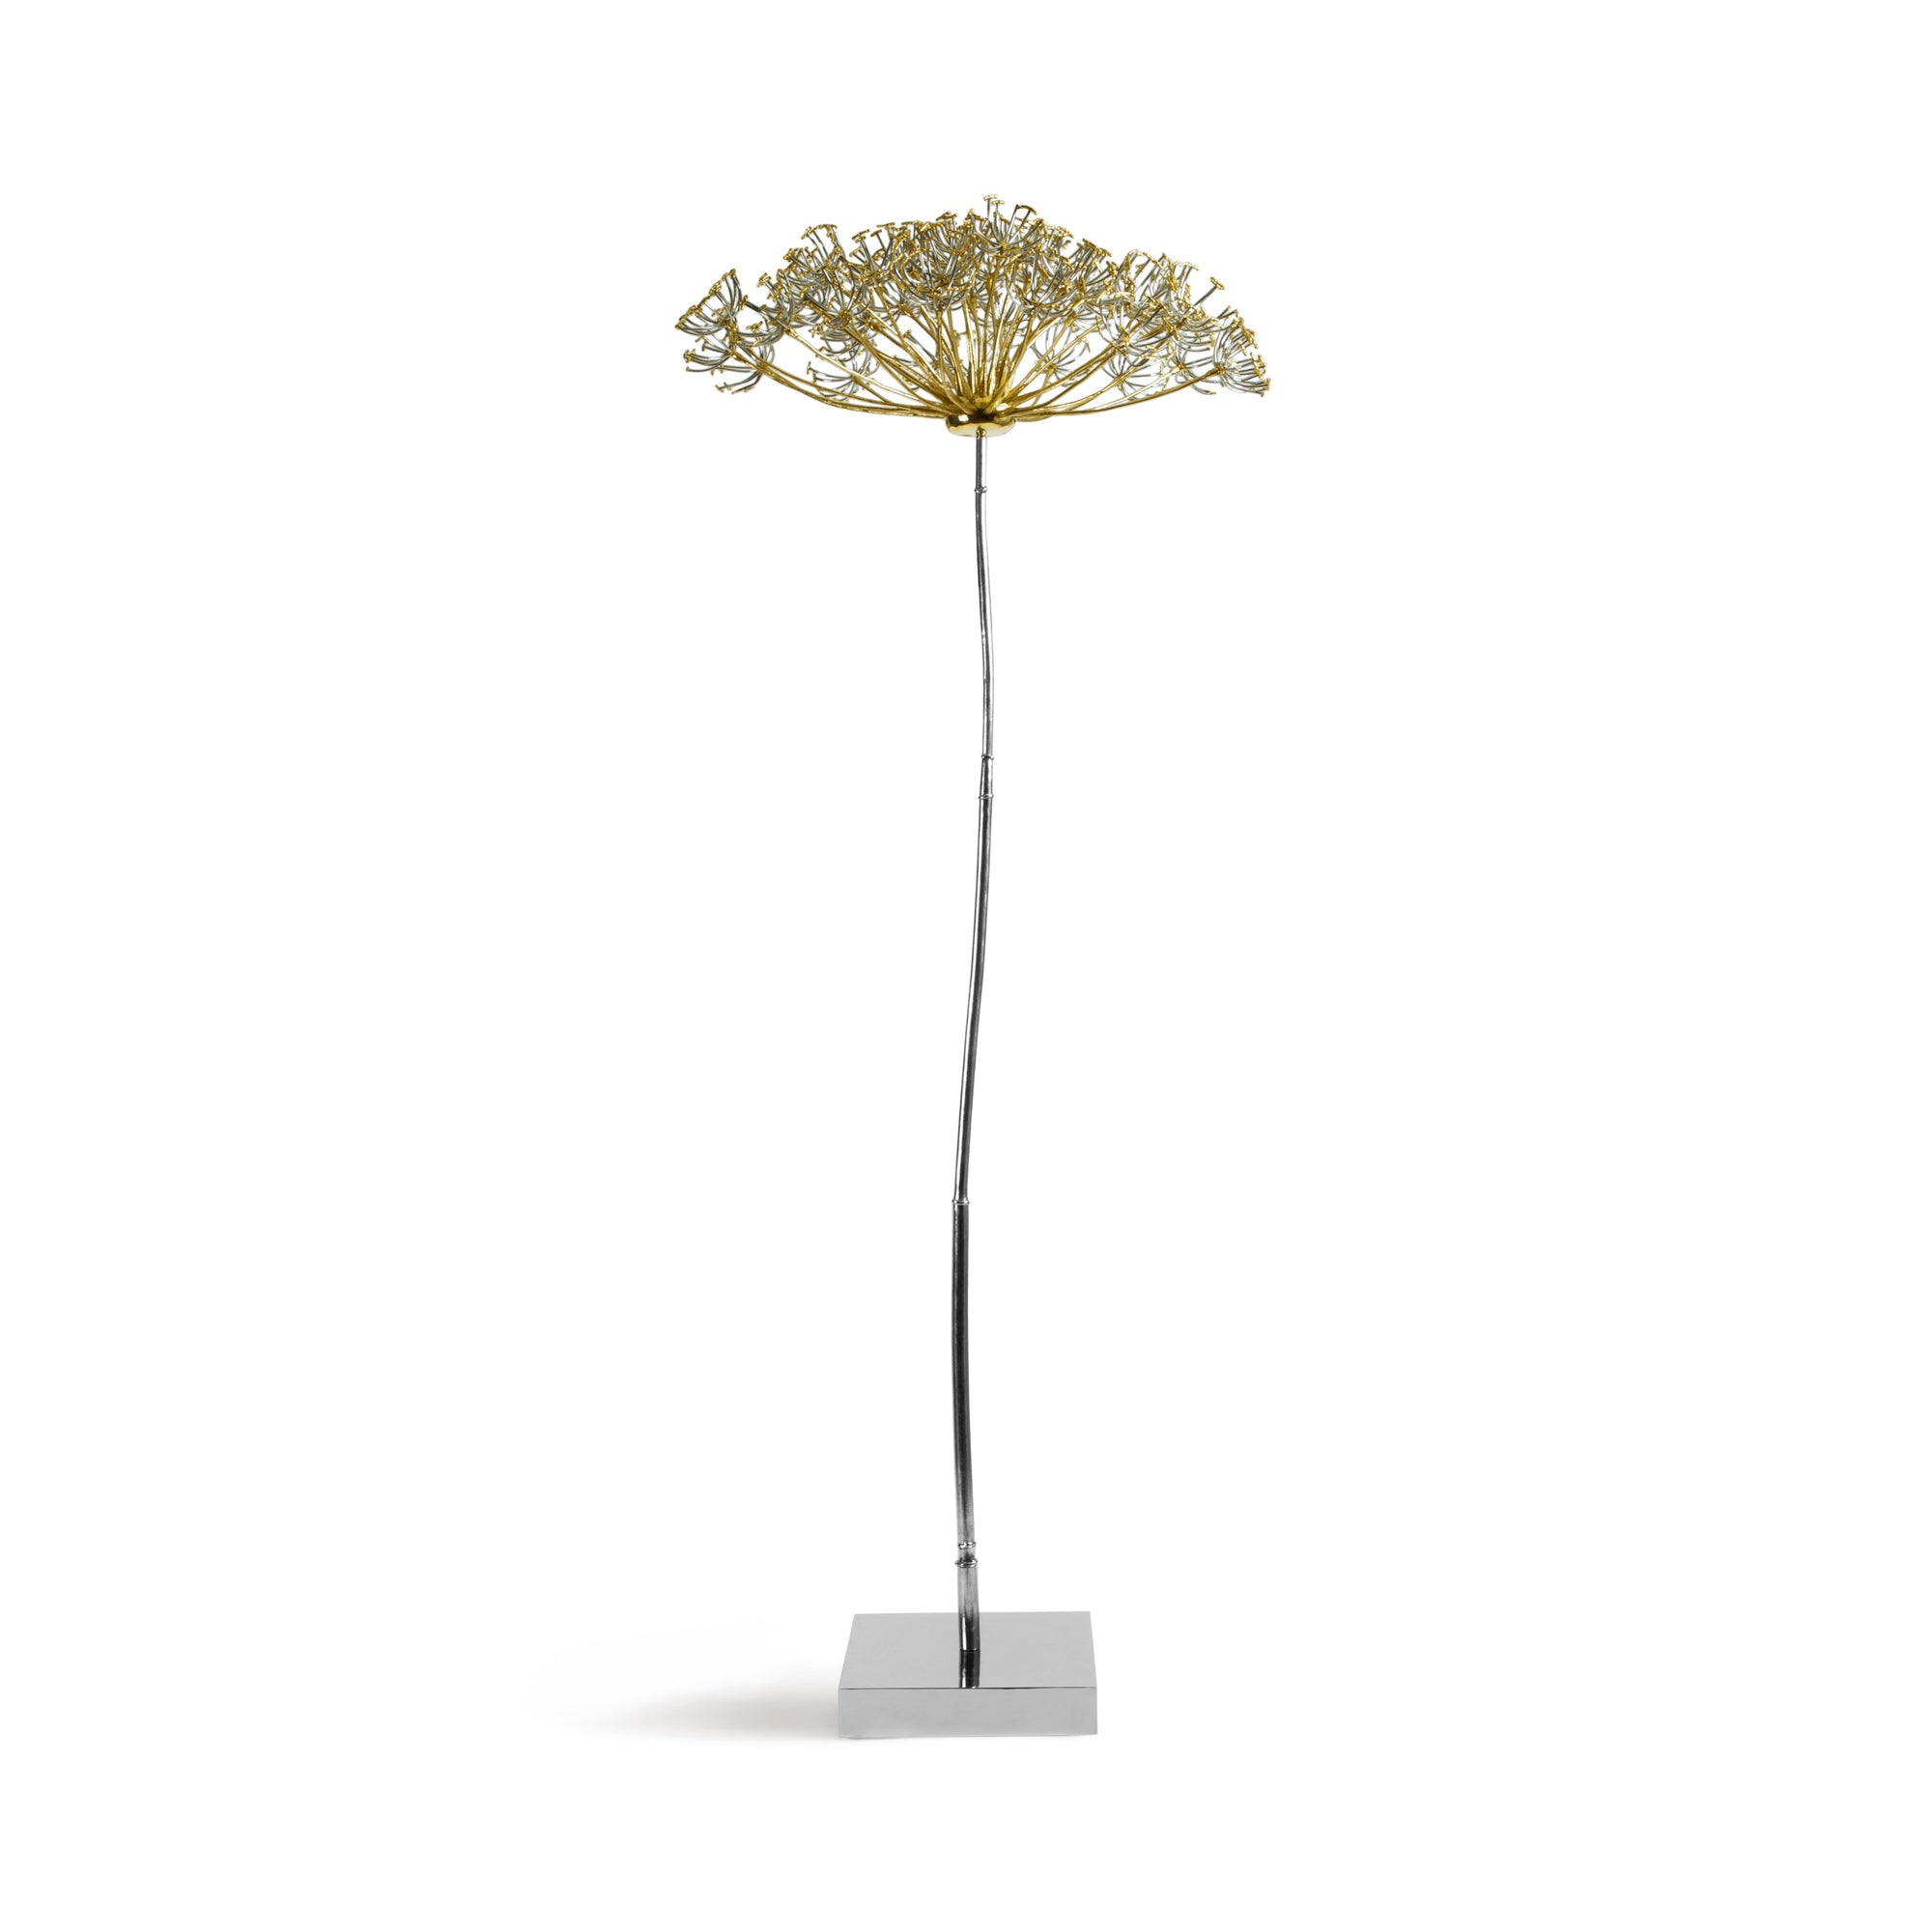 Michael Aram Queen Annes Lace Sculpture (Limited Edition of 250)